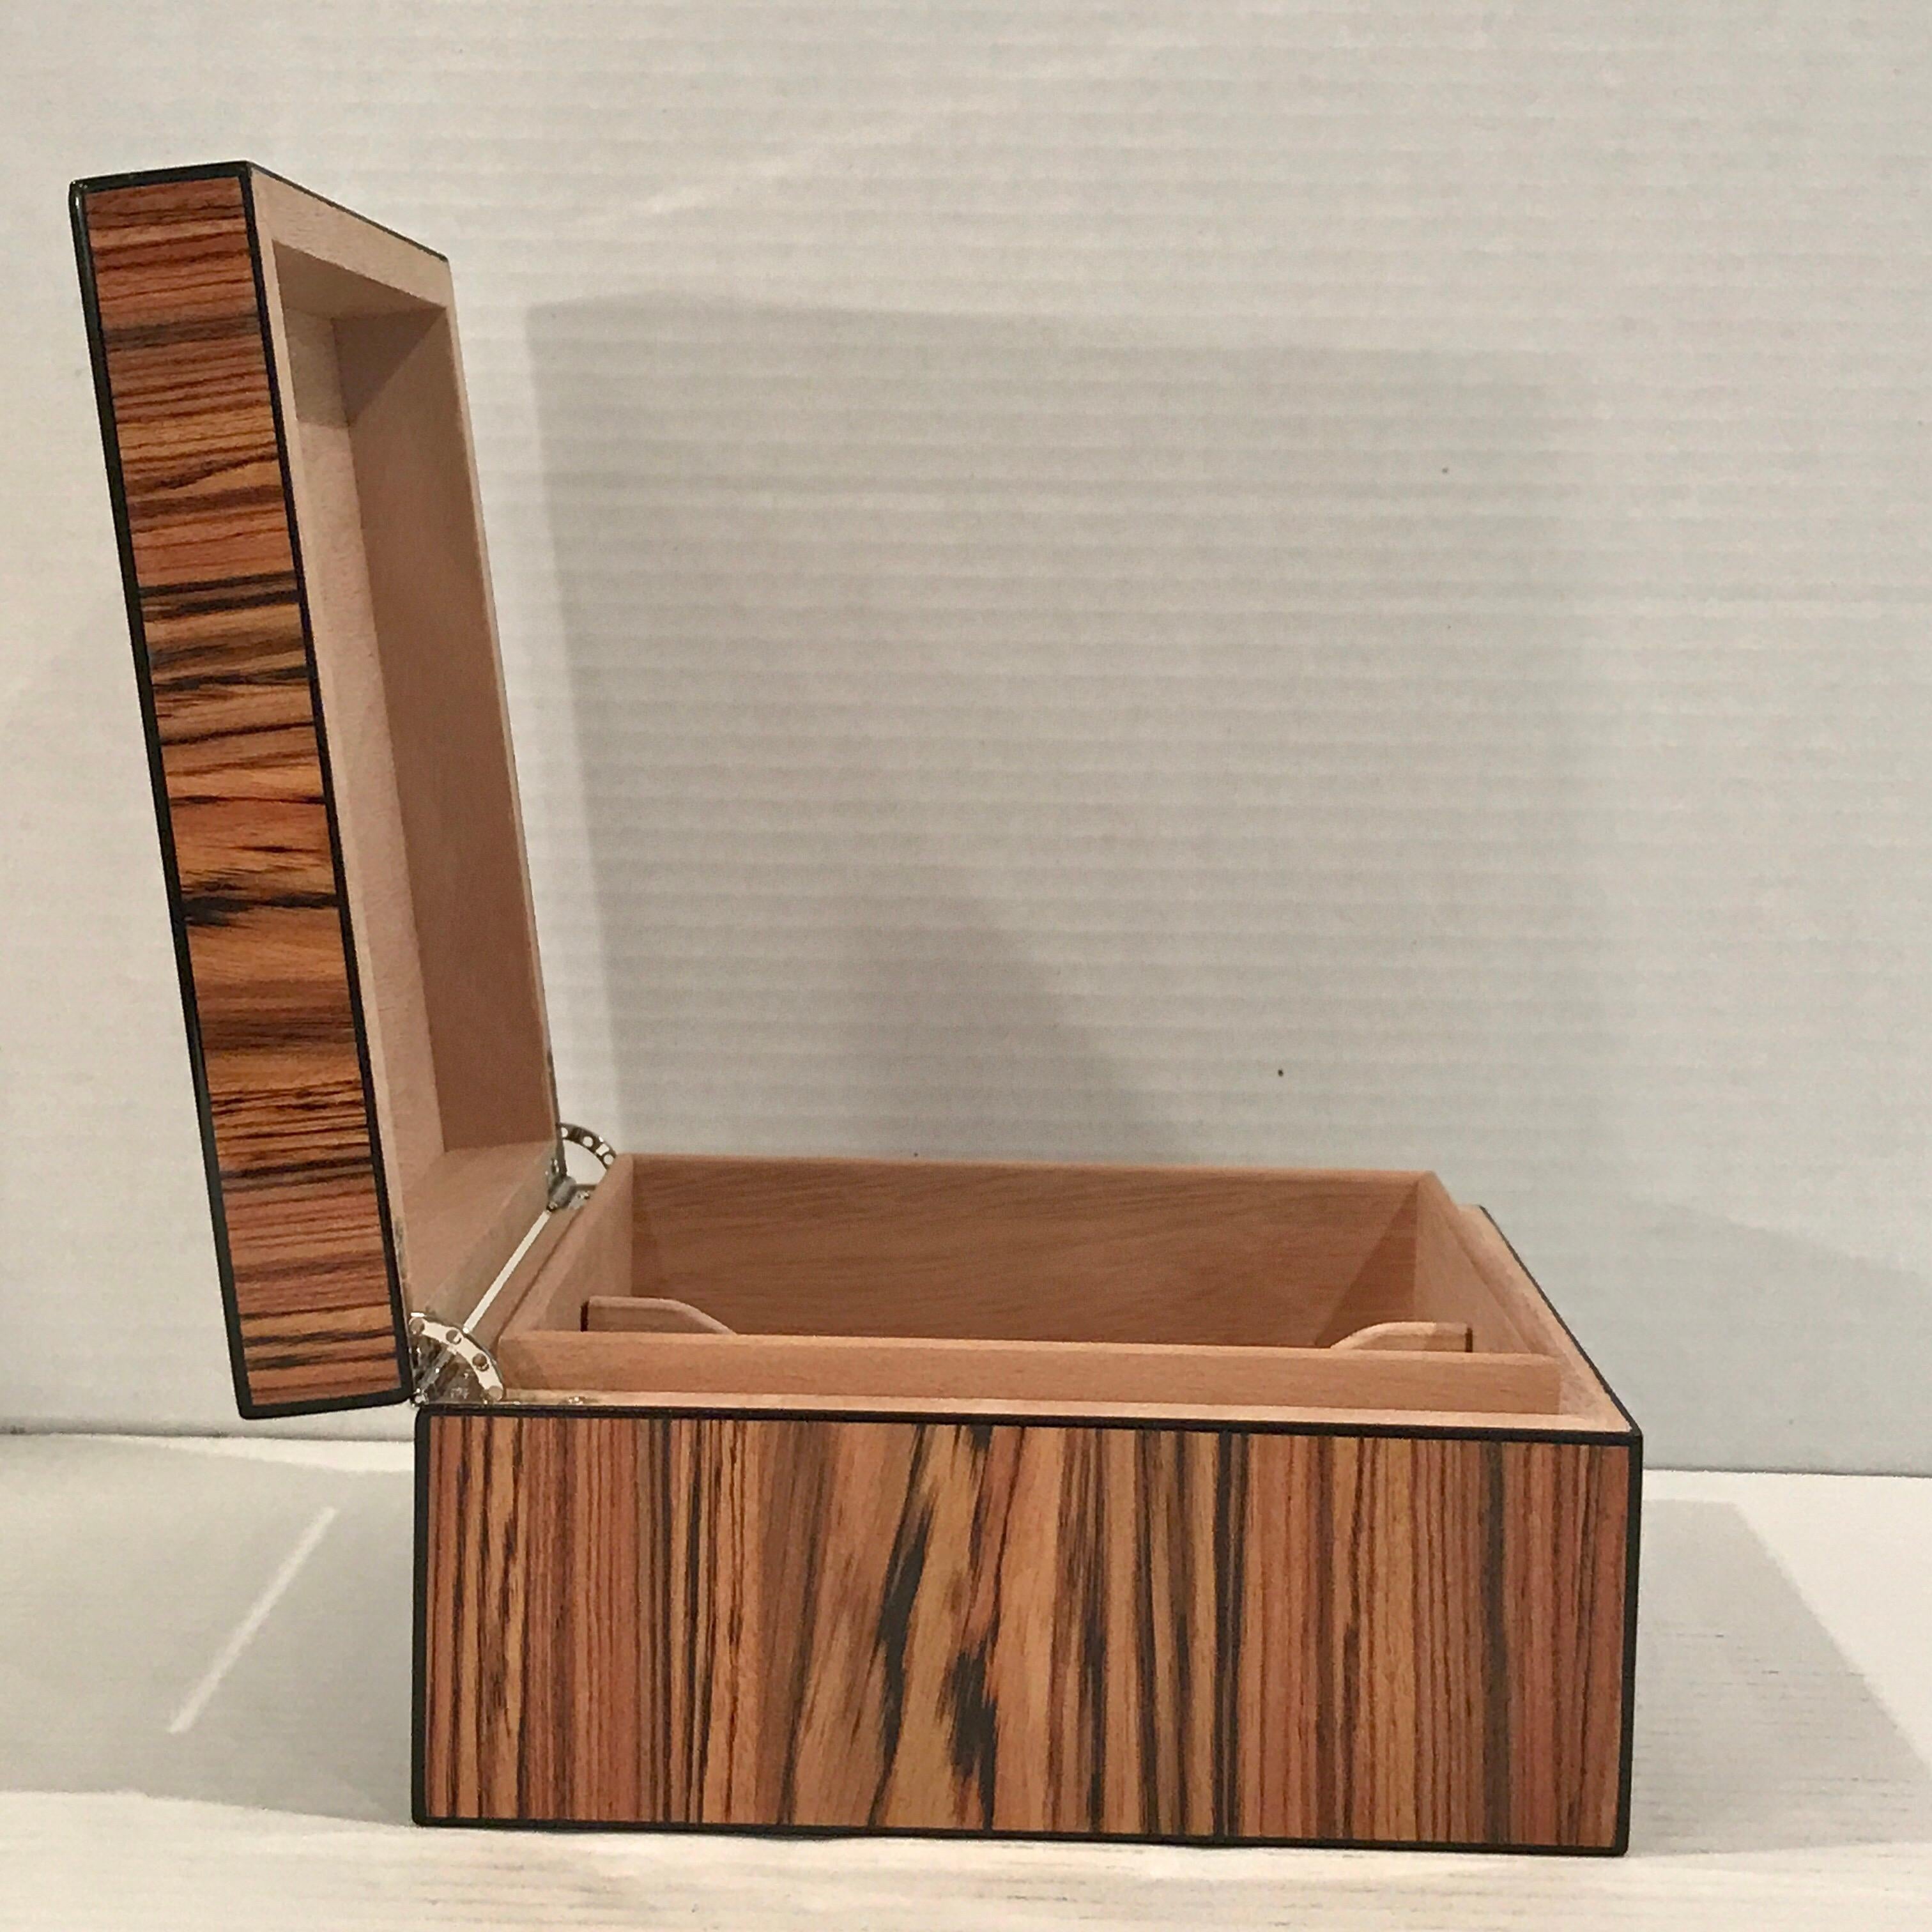 20th Century Art Deco Style Exotic Woods Box or Humidor